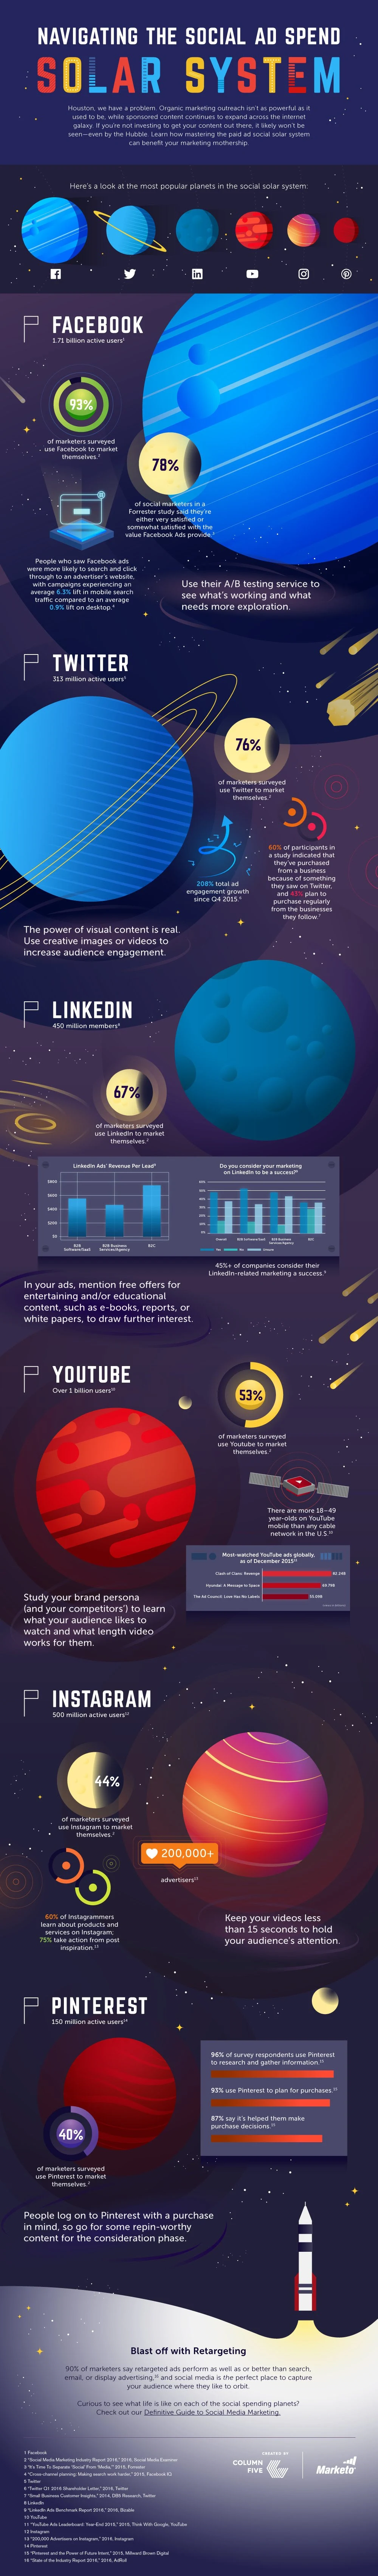 How to Navigate the Social Ad Spend Solar System - #Infographic